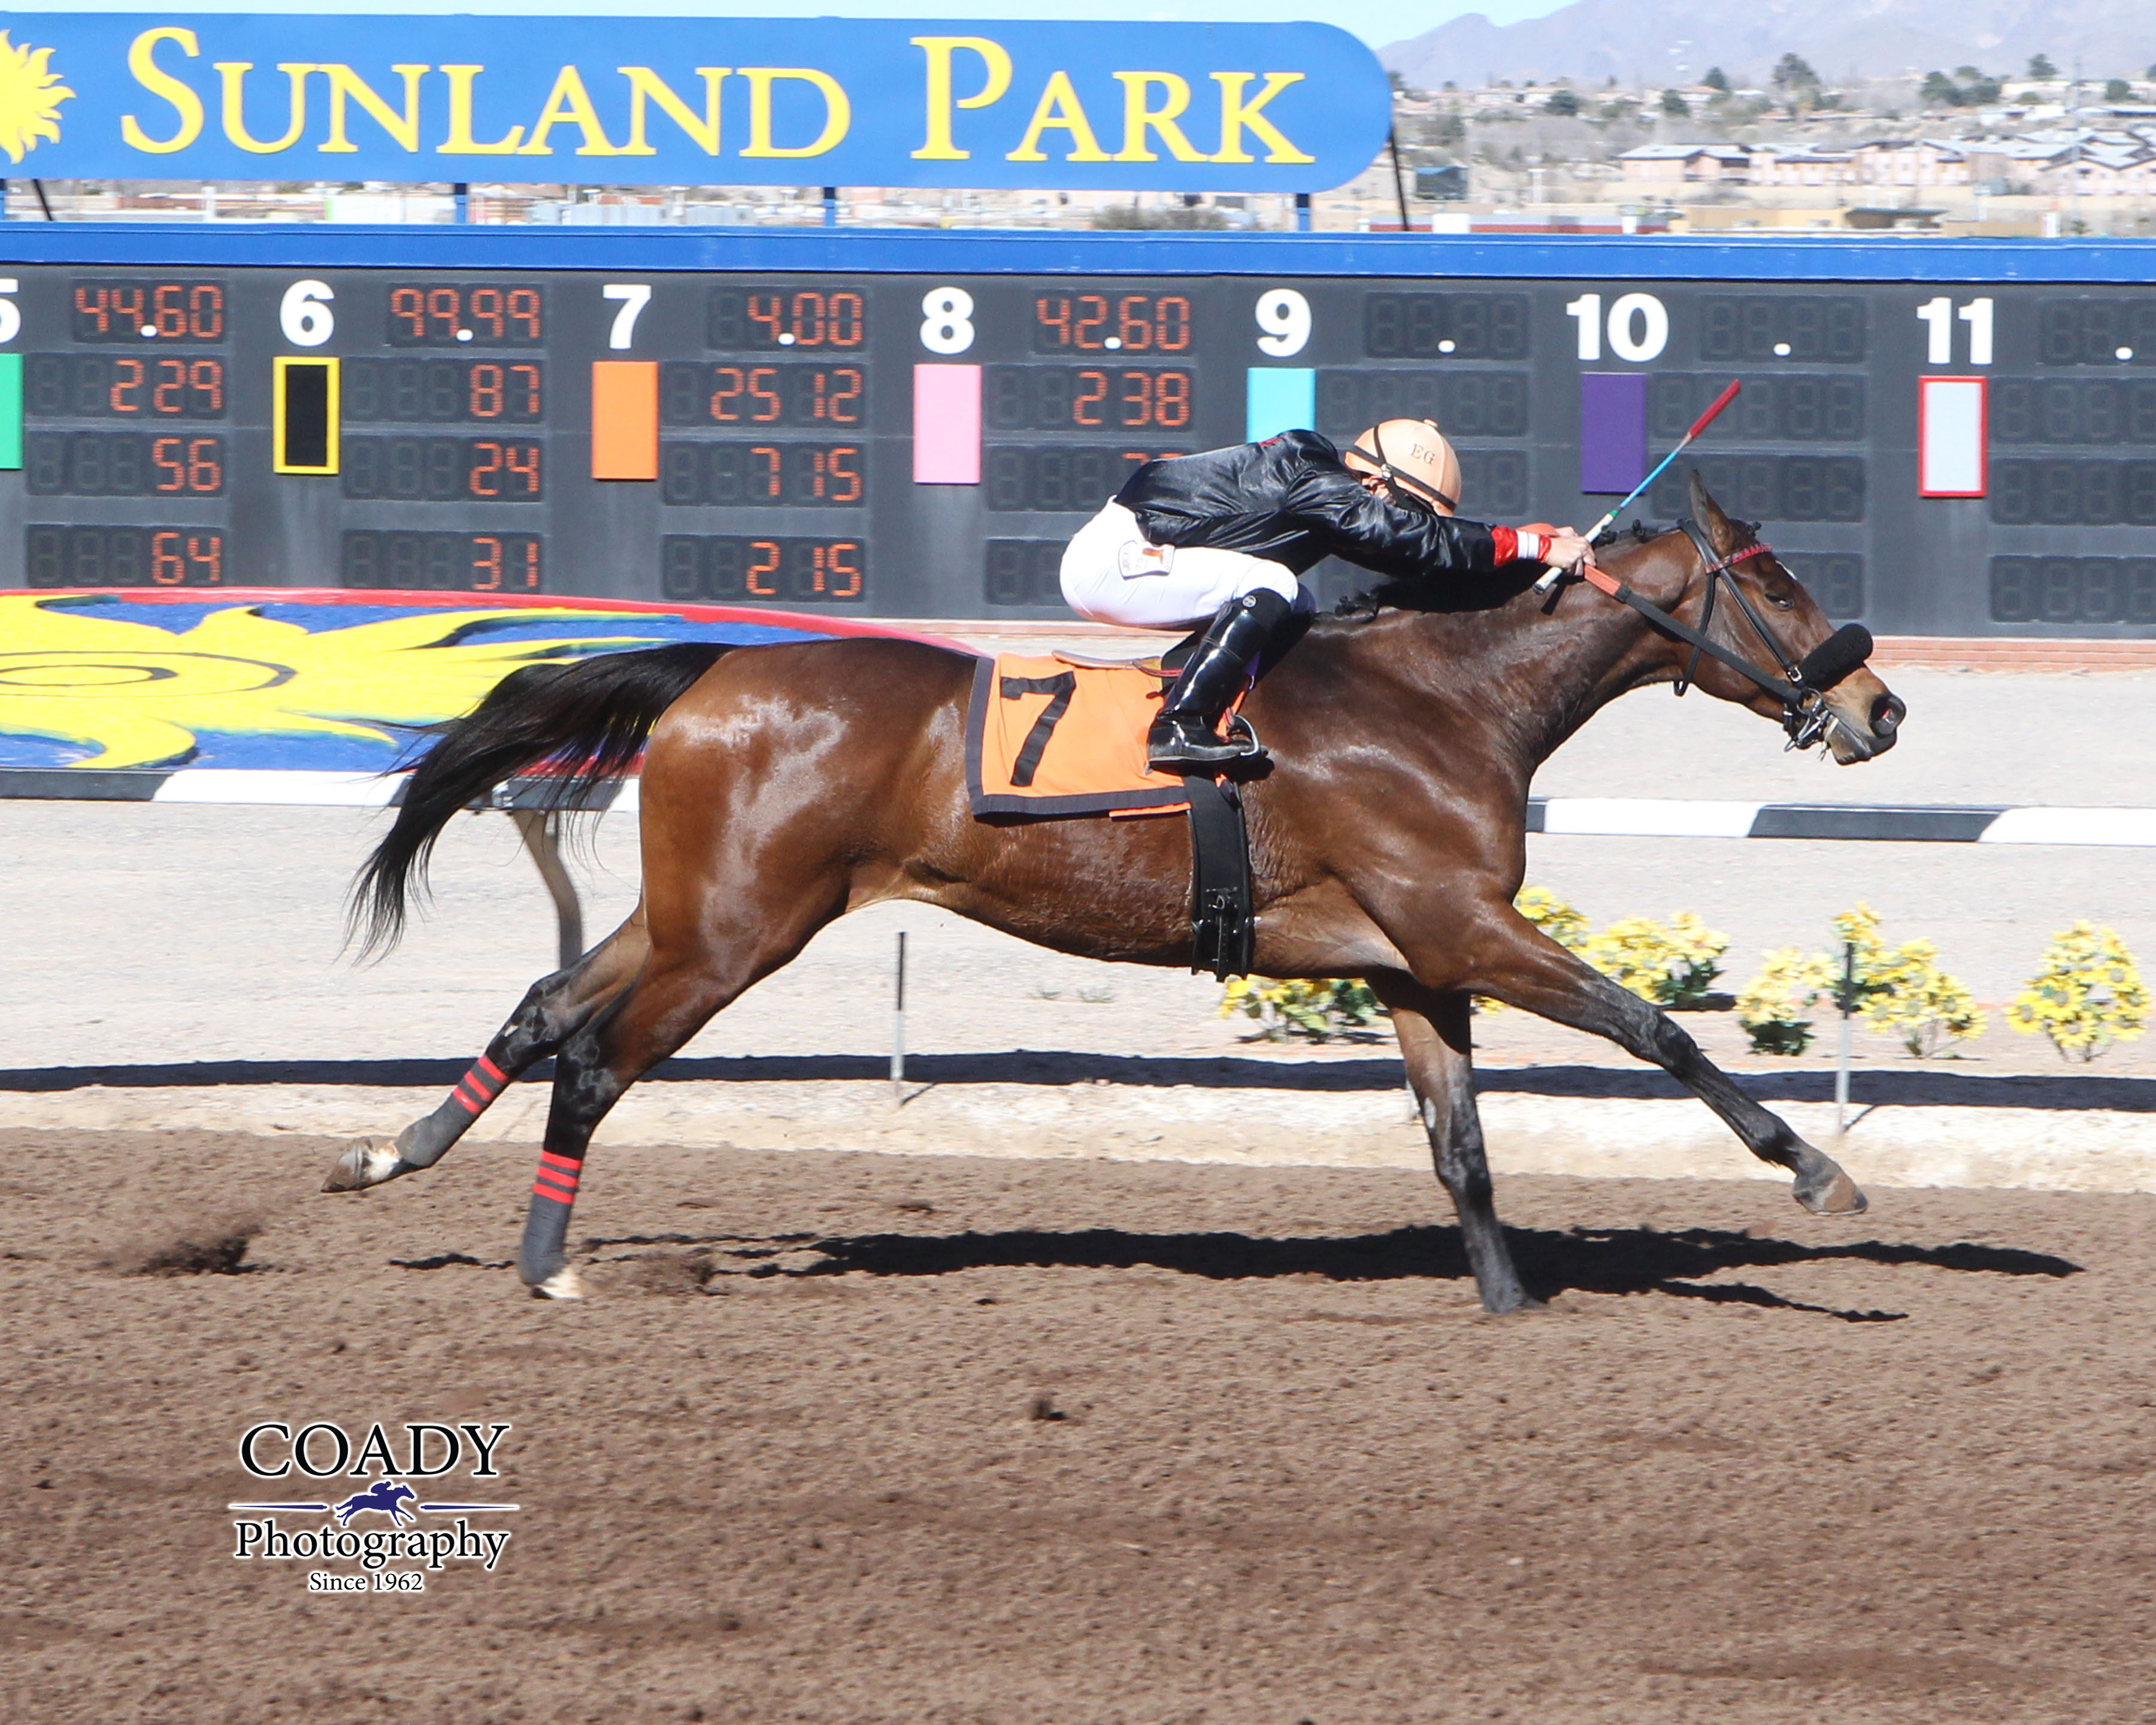 Chas's Legacy scored his sixth lifetime win at Sunland in a claiming race on Feb. 5th. photo courtesy of Coady Photography.